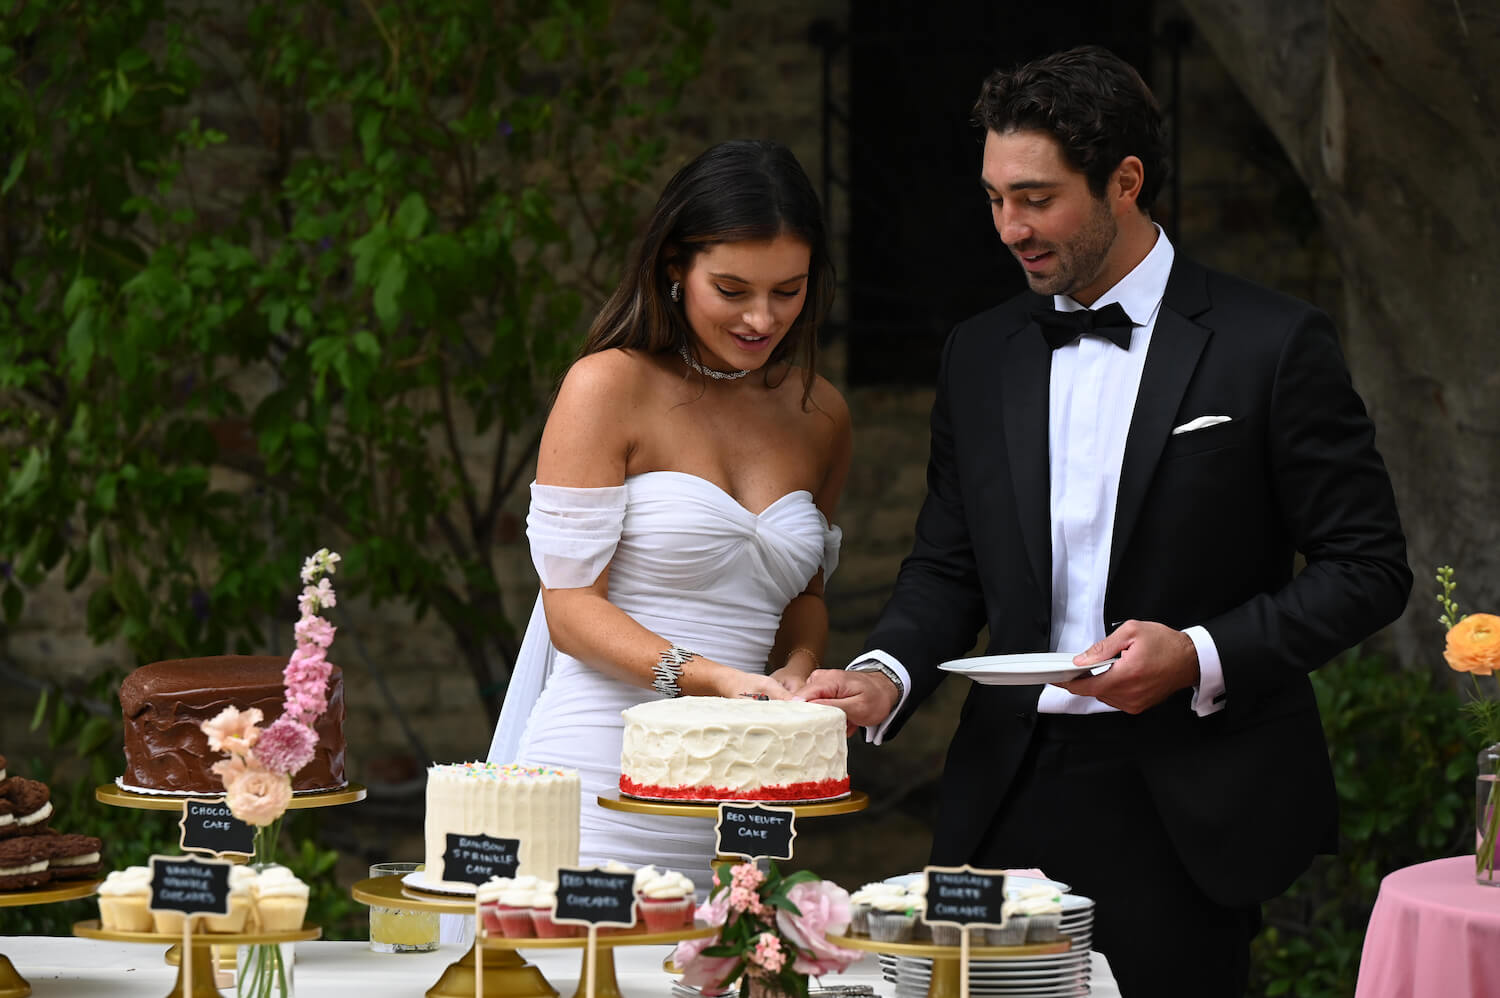 'The Bachelor' Season 28 star Joey Graziadei in a tux, cutting cake with Lexi Young, who's wearing a wedding dress